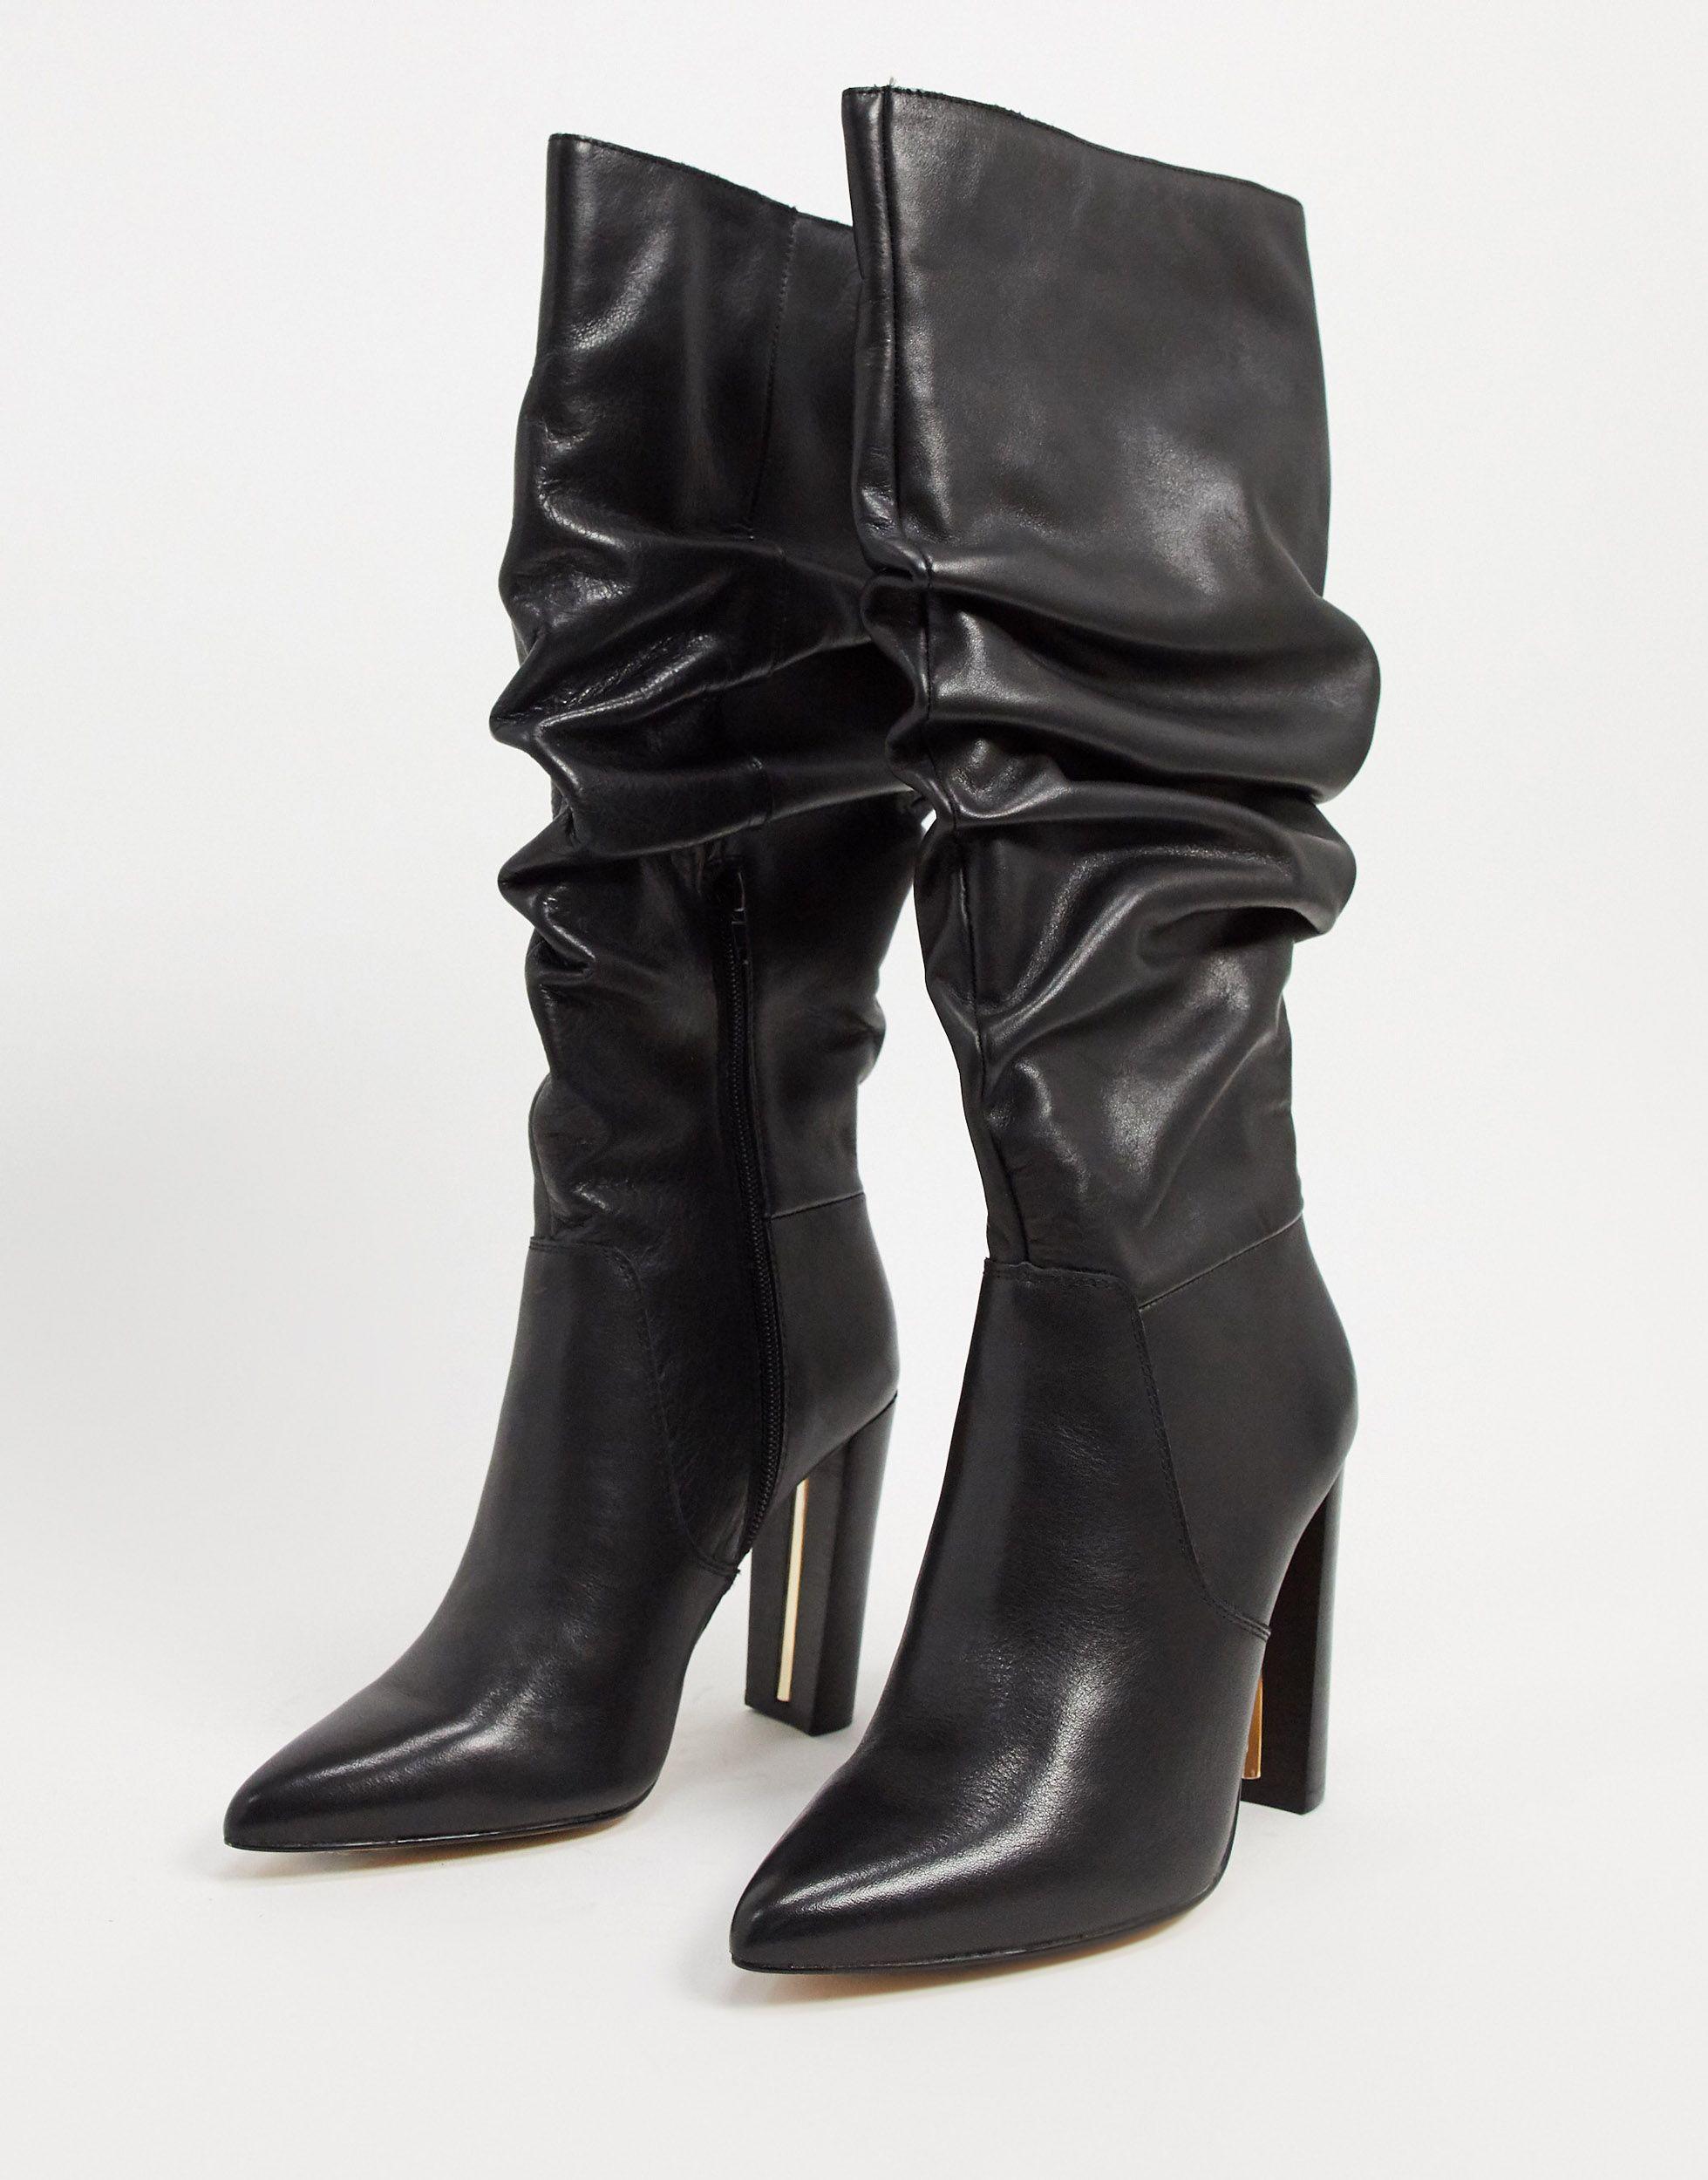 River Island Slouch Knee High Boots In Black Lyst